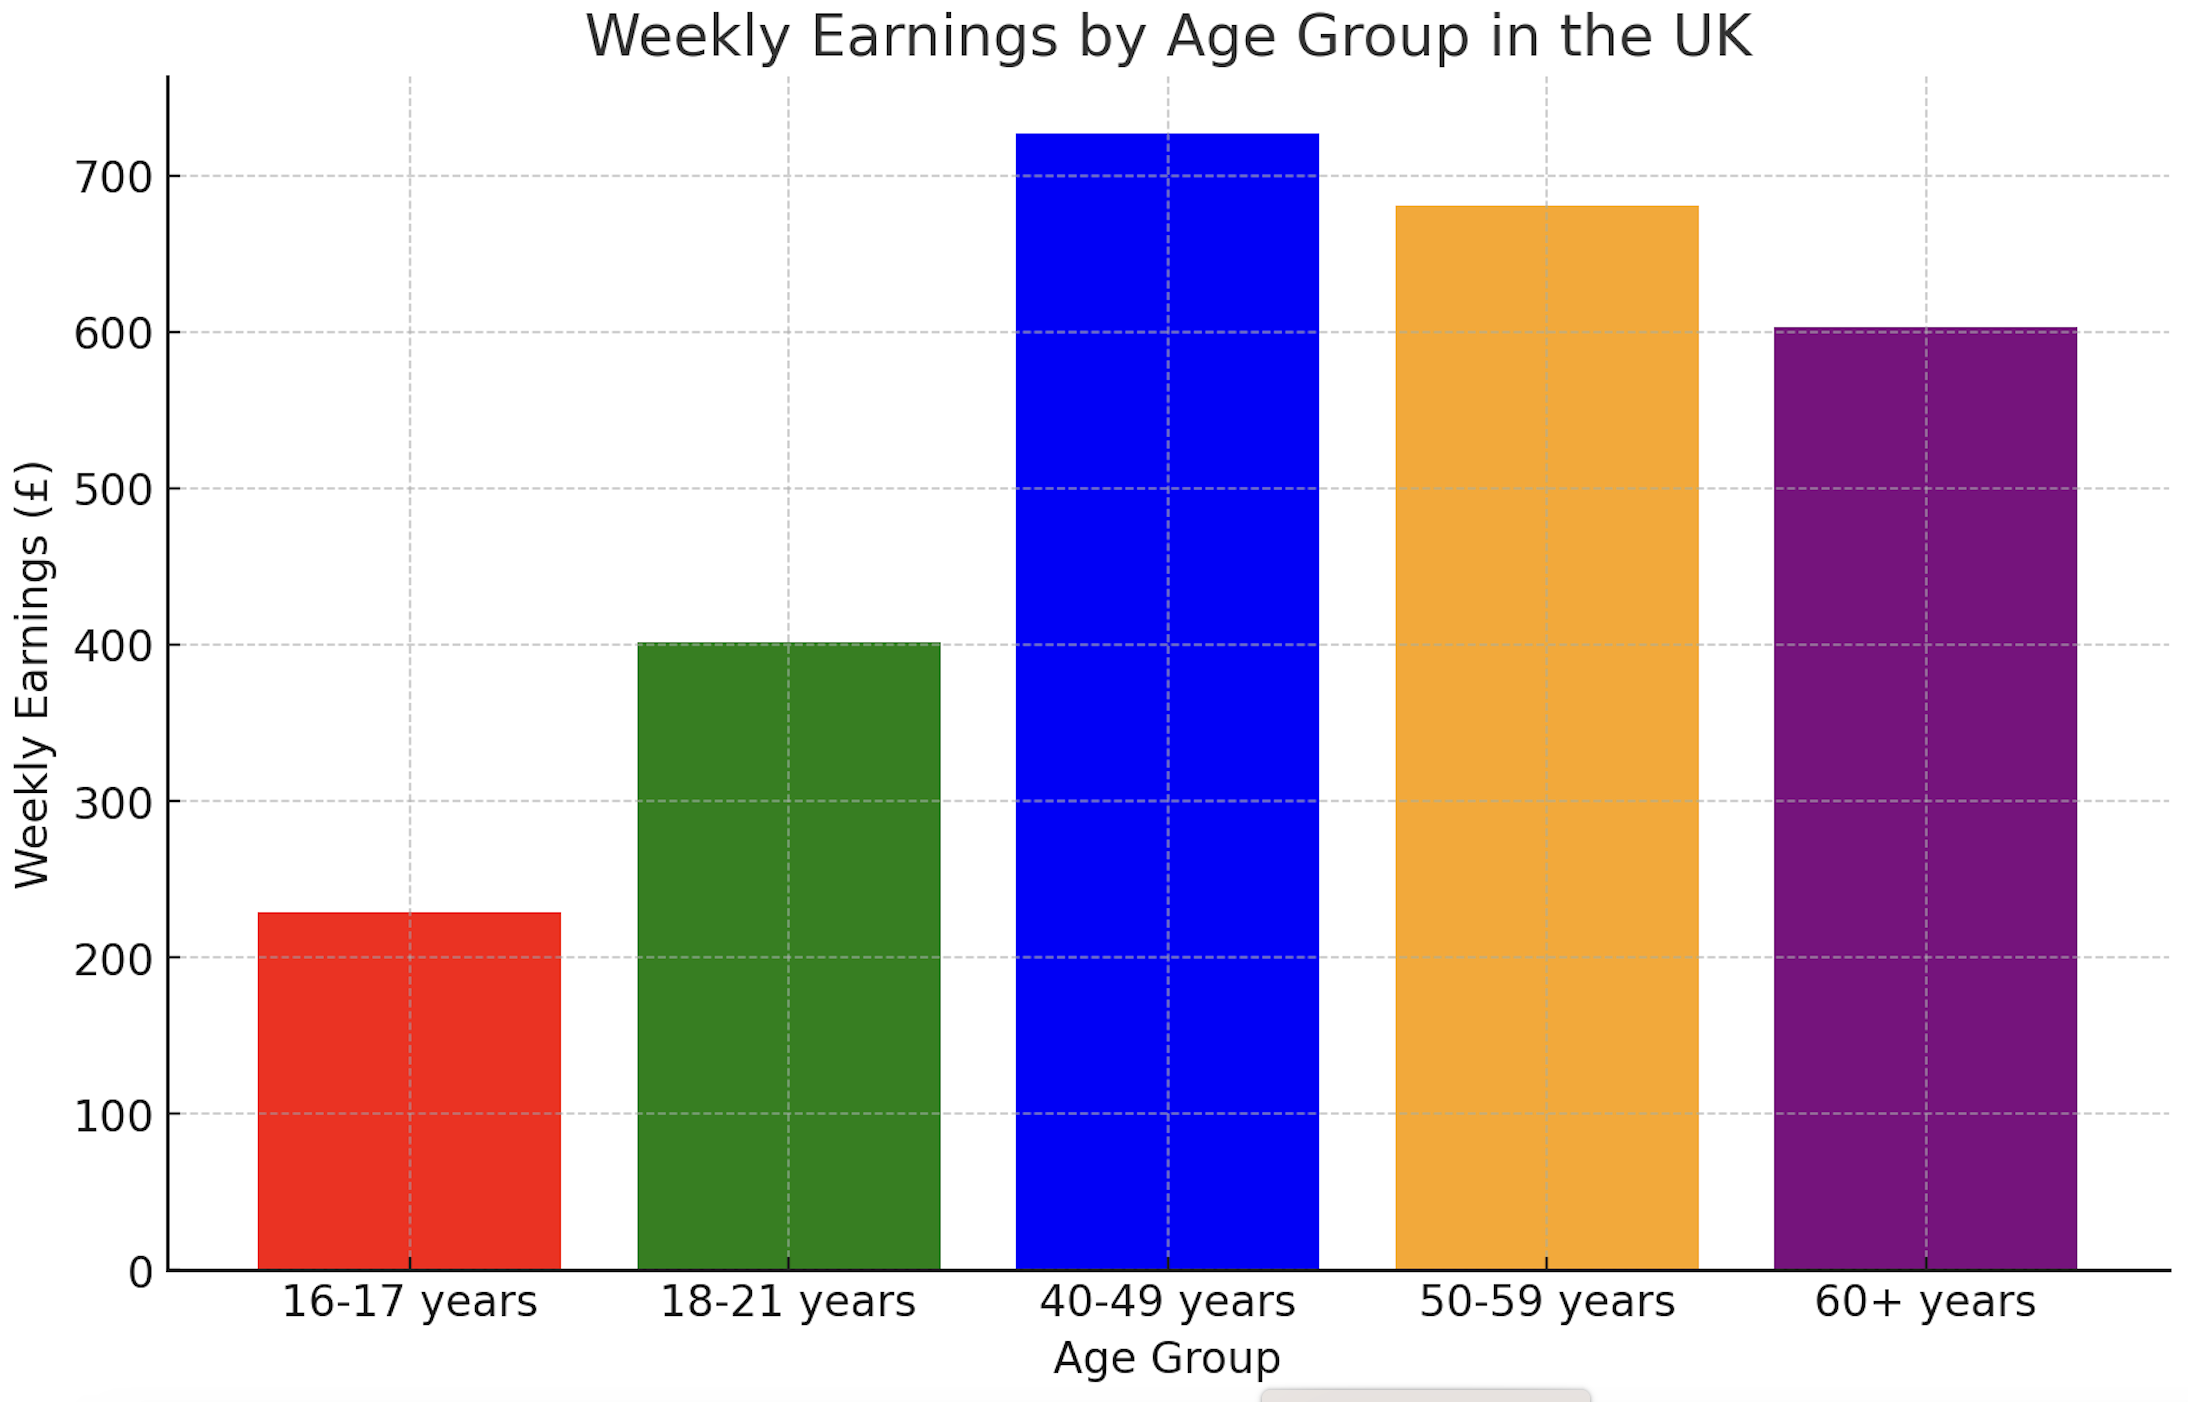 Earnings by Age Group UK